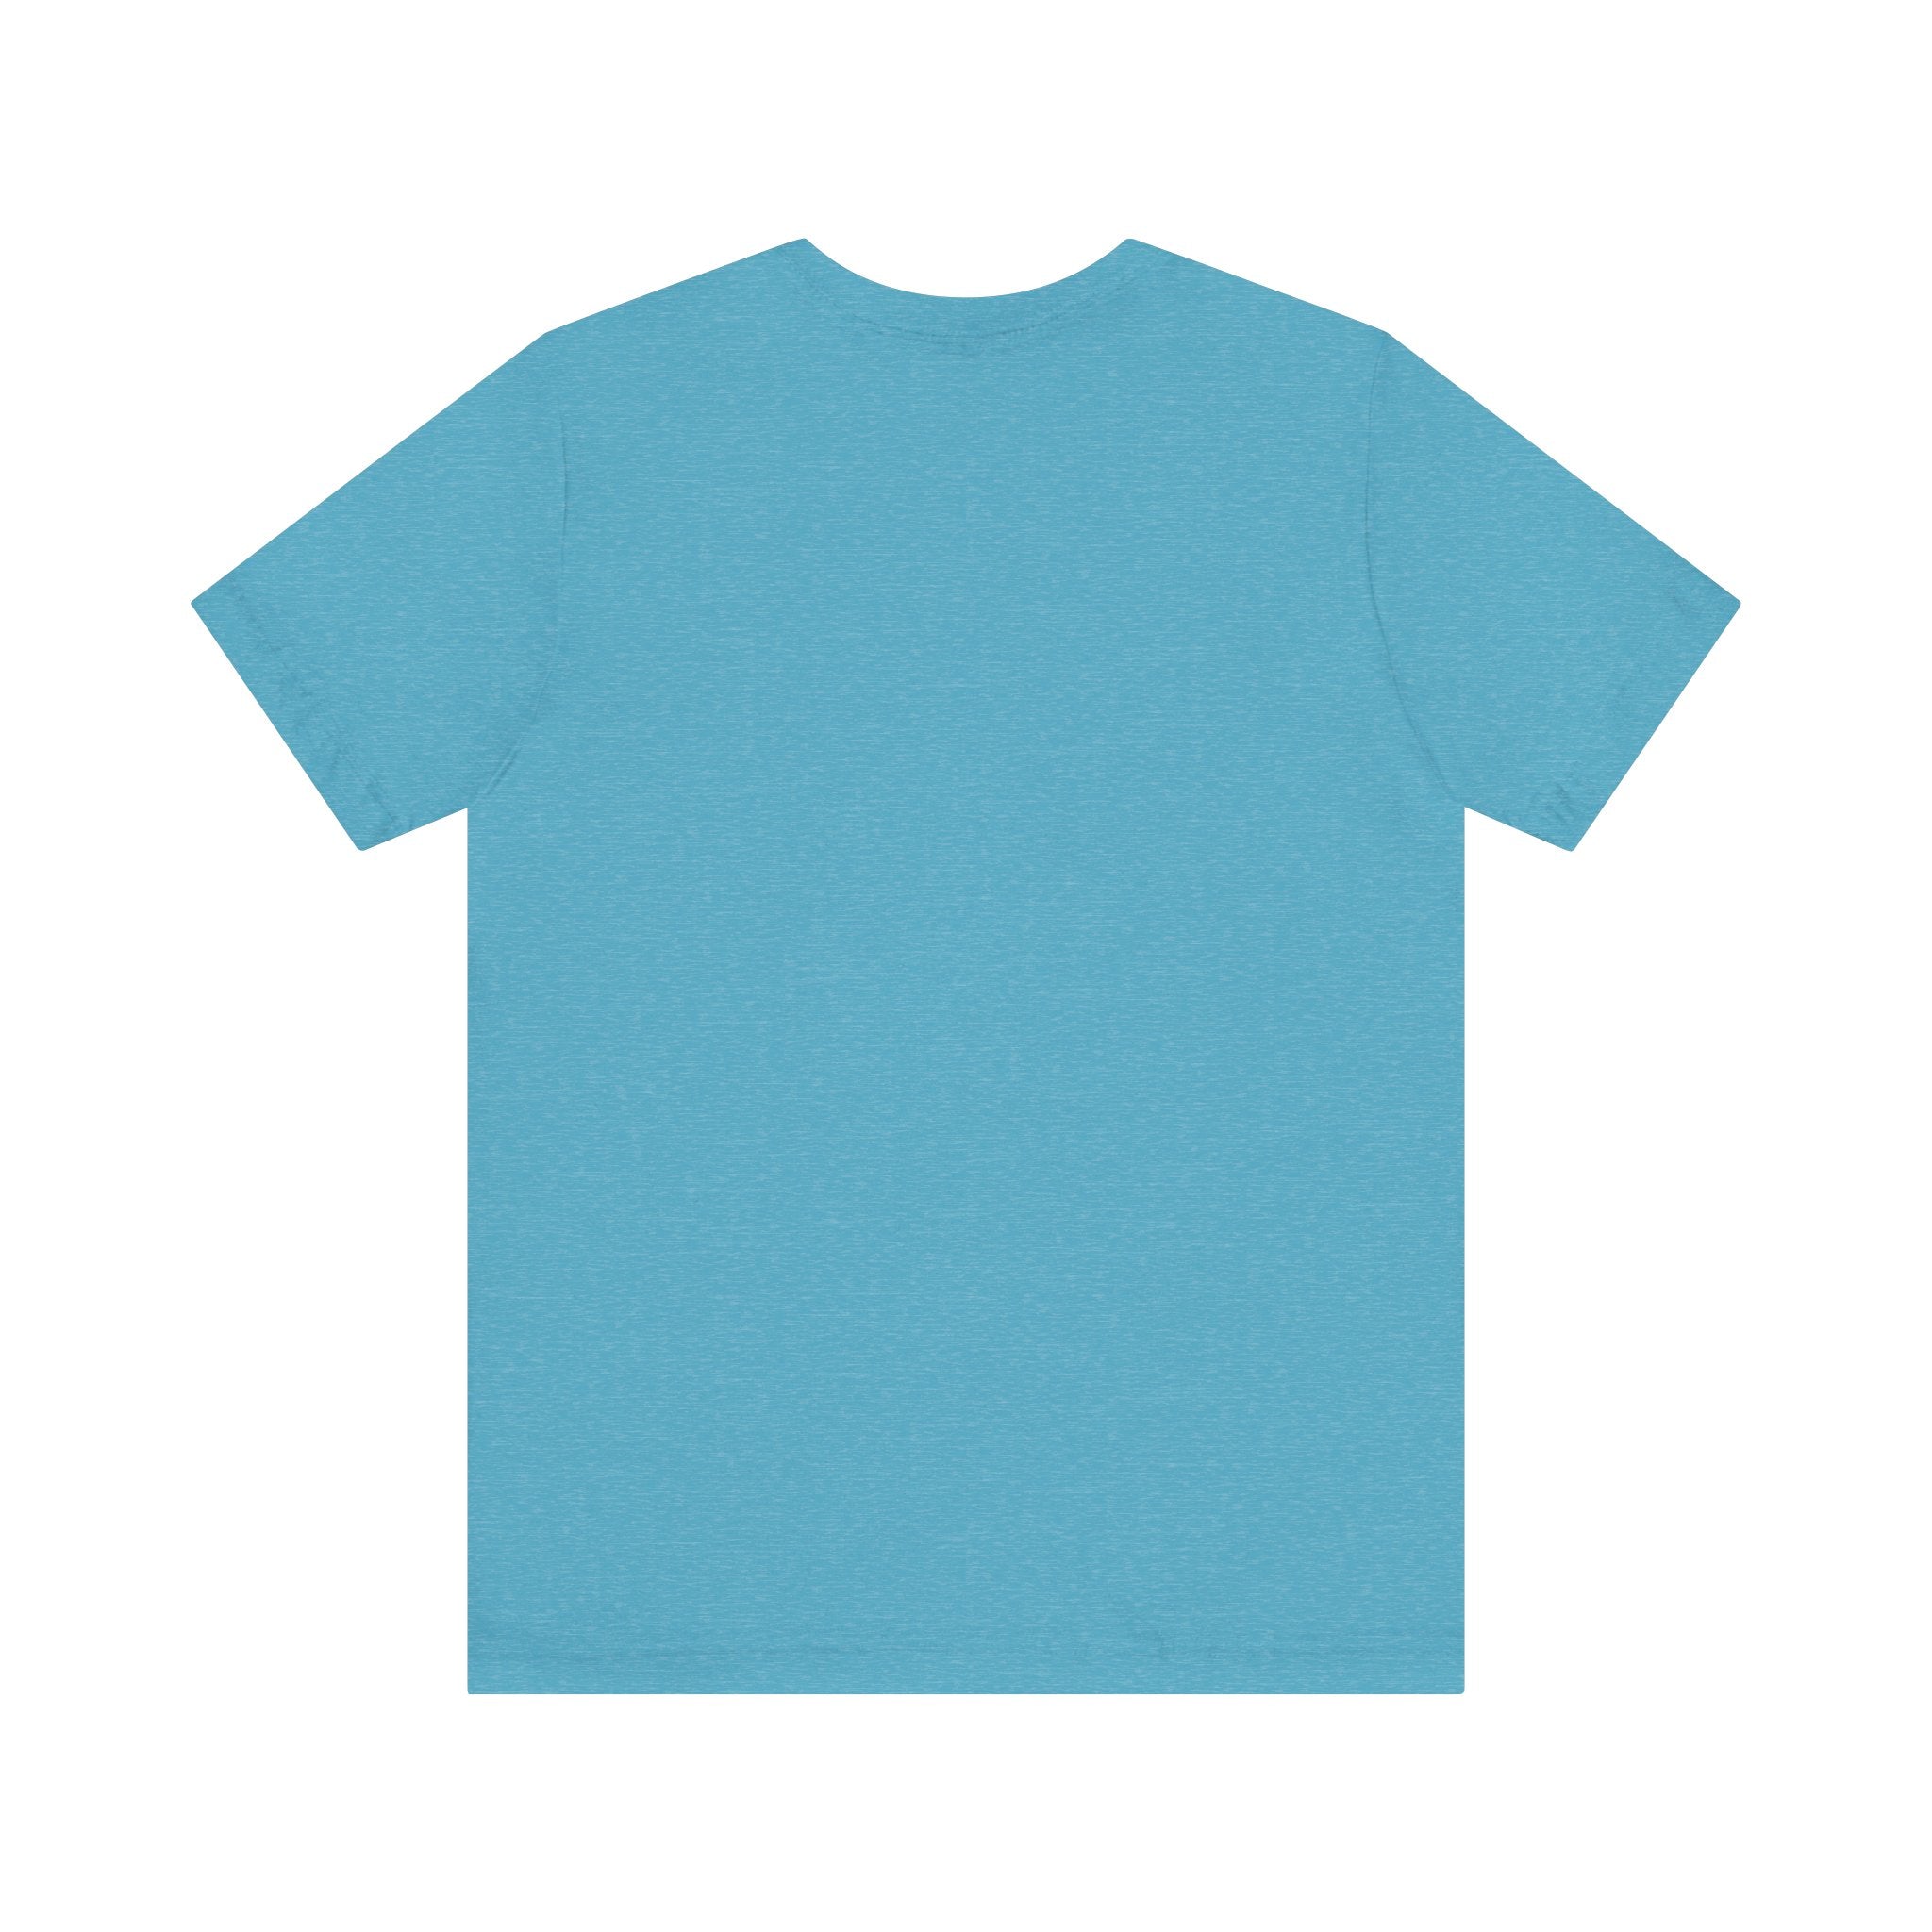 Blue Catch the Waves Surfing T-Shirt - direct-to-garment printed item